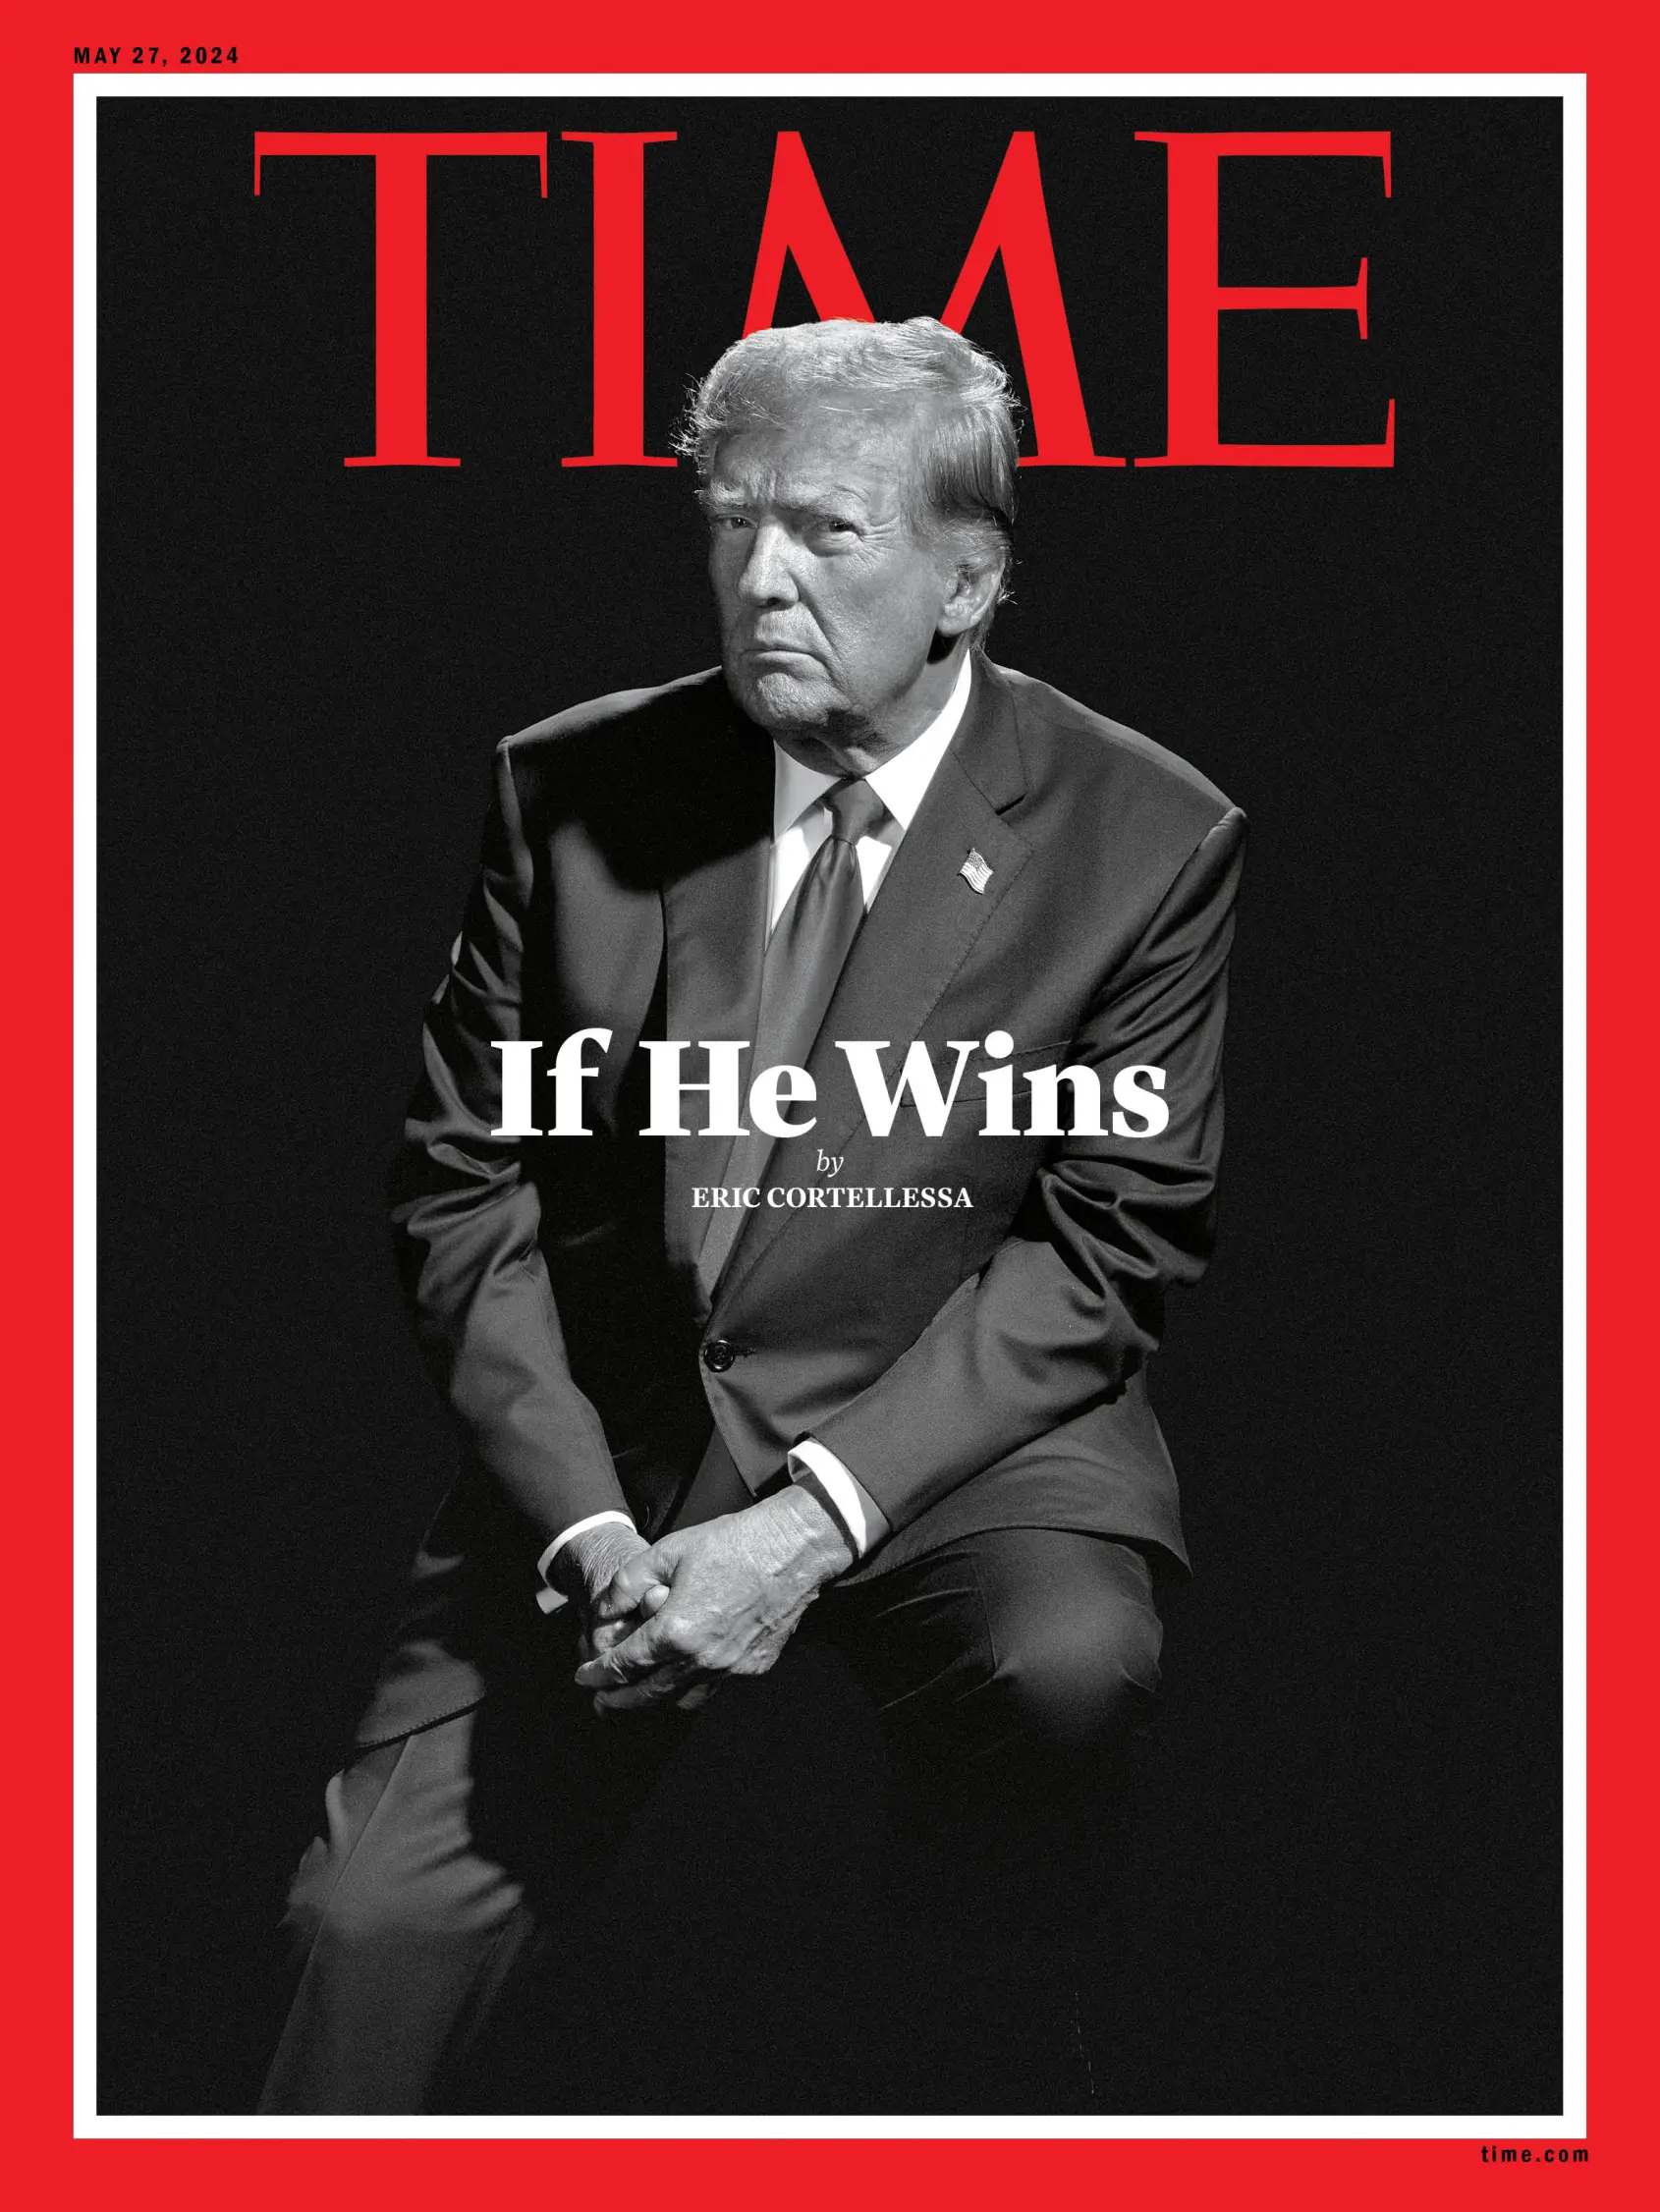 In a wide-ranging interview with TIME Magazine, Donald Trump pledged to take steps to prevent the rise of anti-White racism in the country and end DEI policies. (Photograph by Philip Montgomery for TIME)